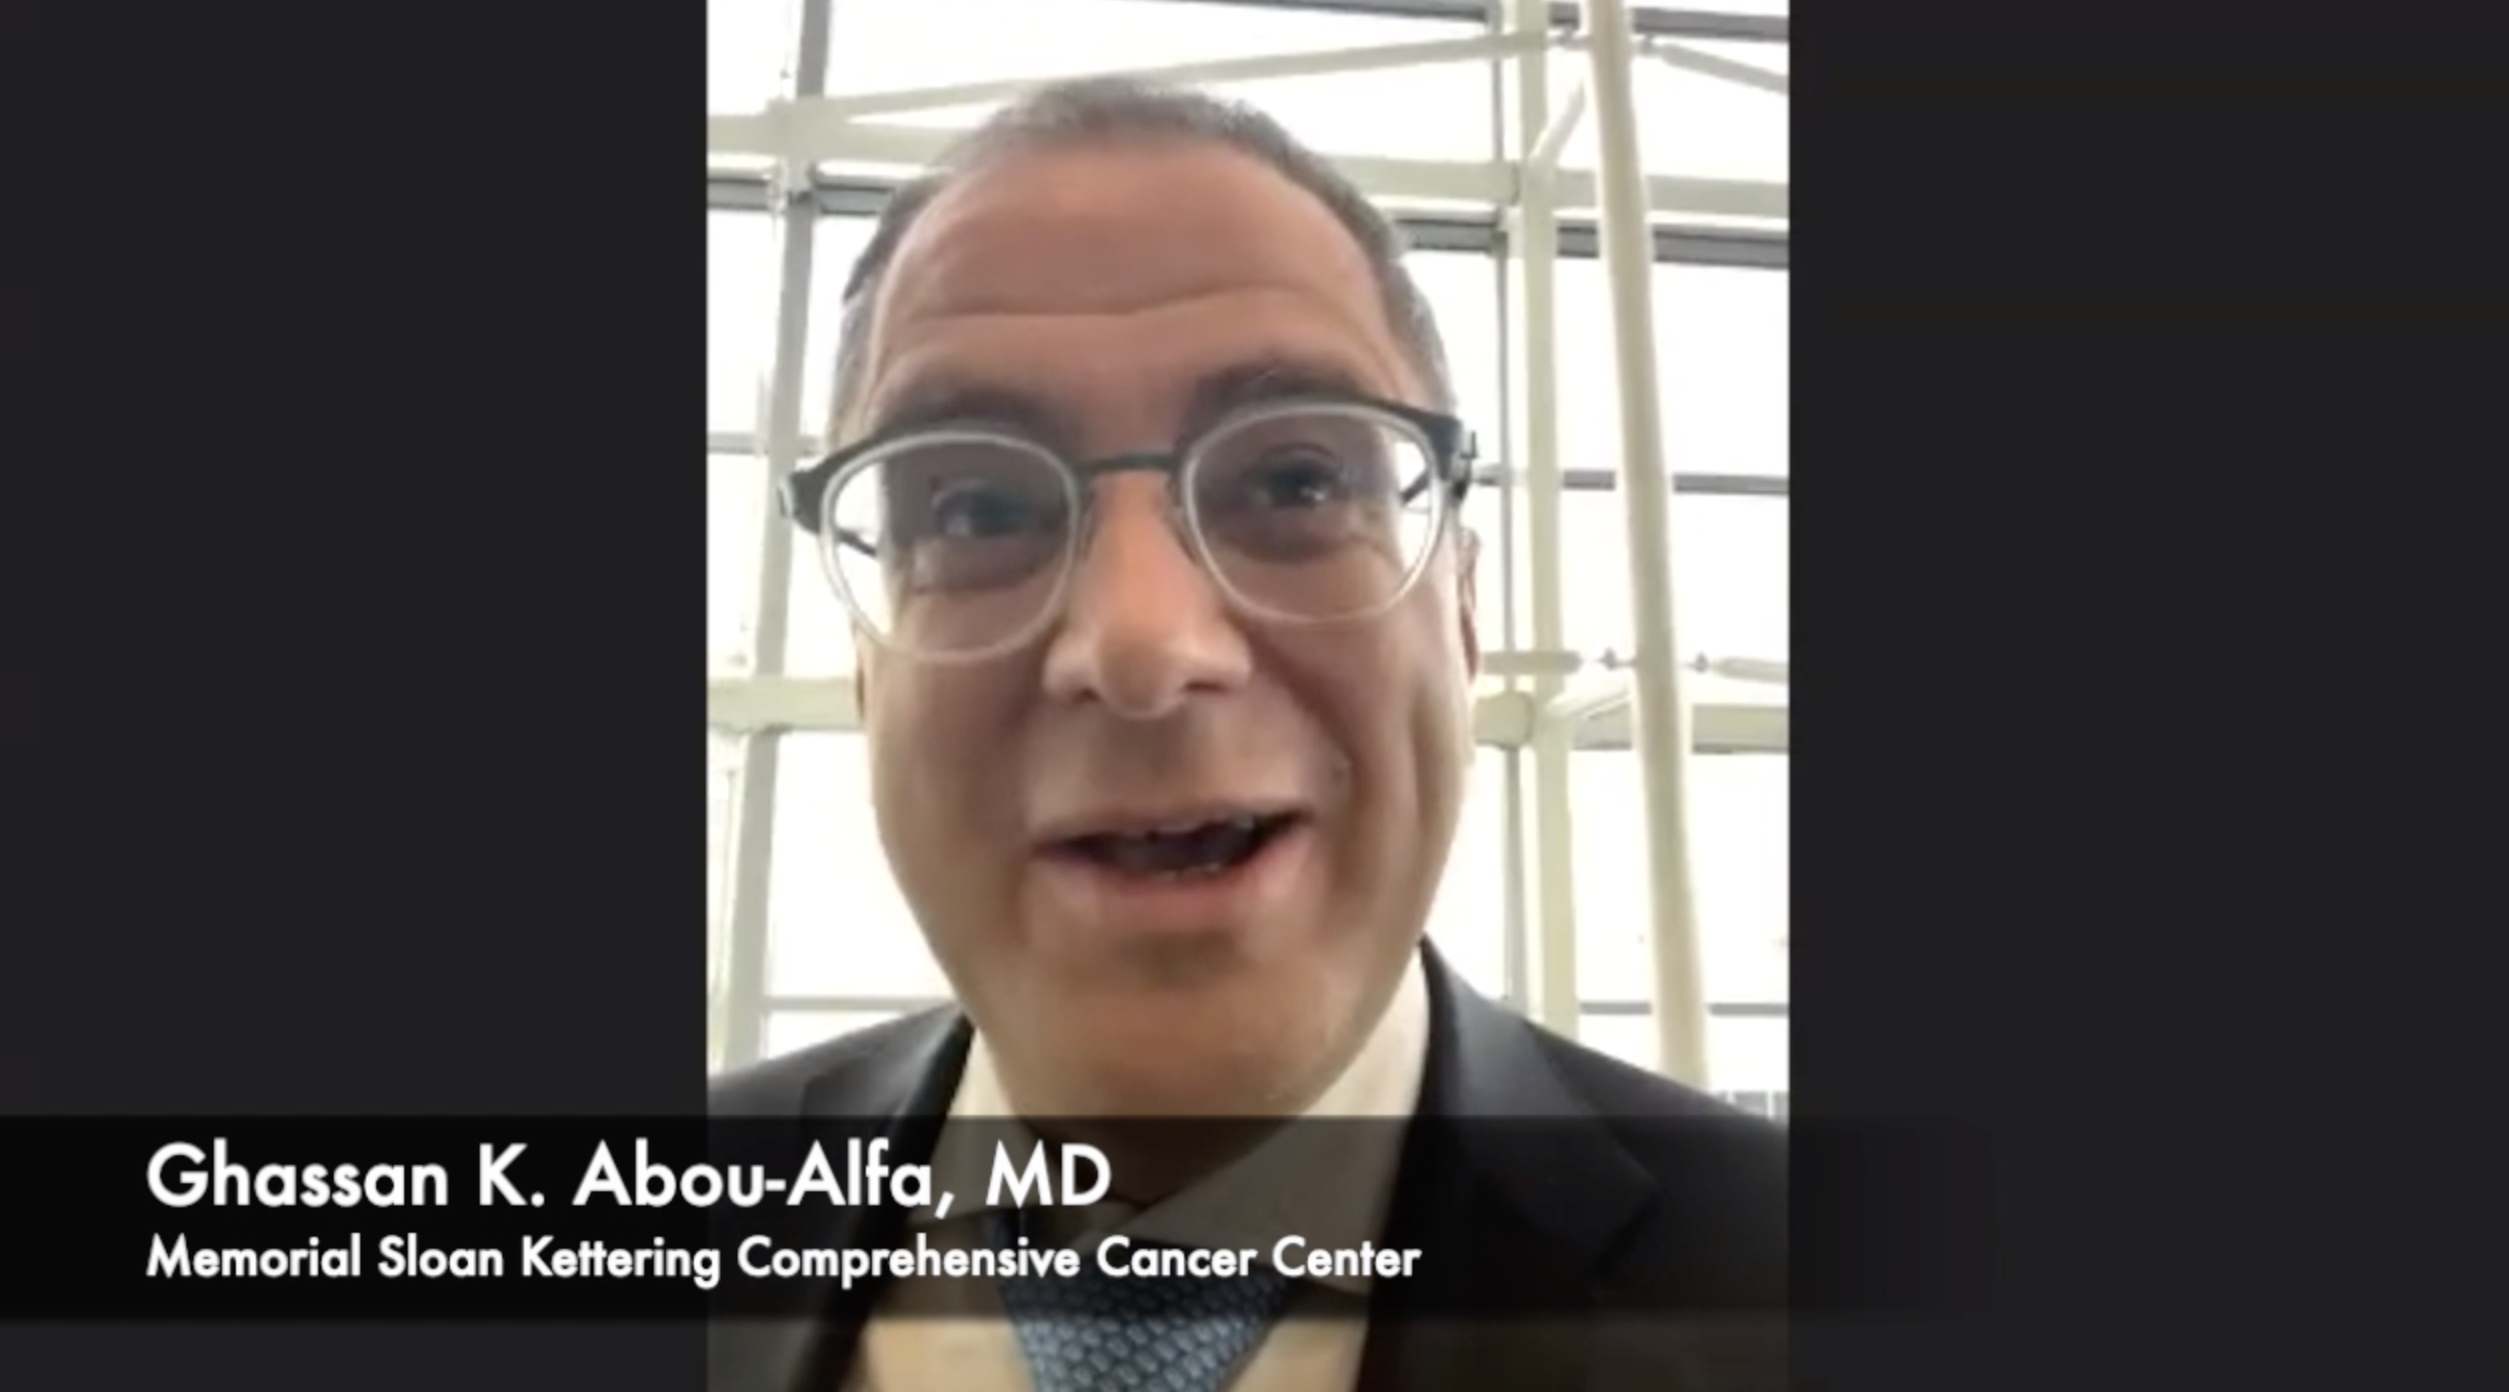 Ghassan K. Abou-Alfa, MD, examined the trial design of the phase 3 HIMALAYA trial of tremelimumab plus durvalumab for frontline hepatocellular carcinoma, with results presented at the 2022 Gastrointestinal Cancers Symposium.